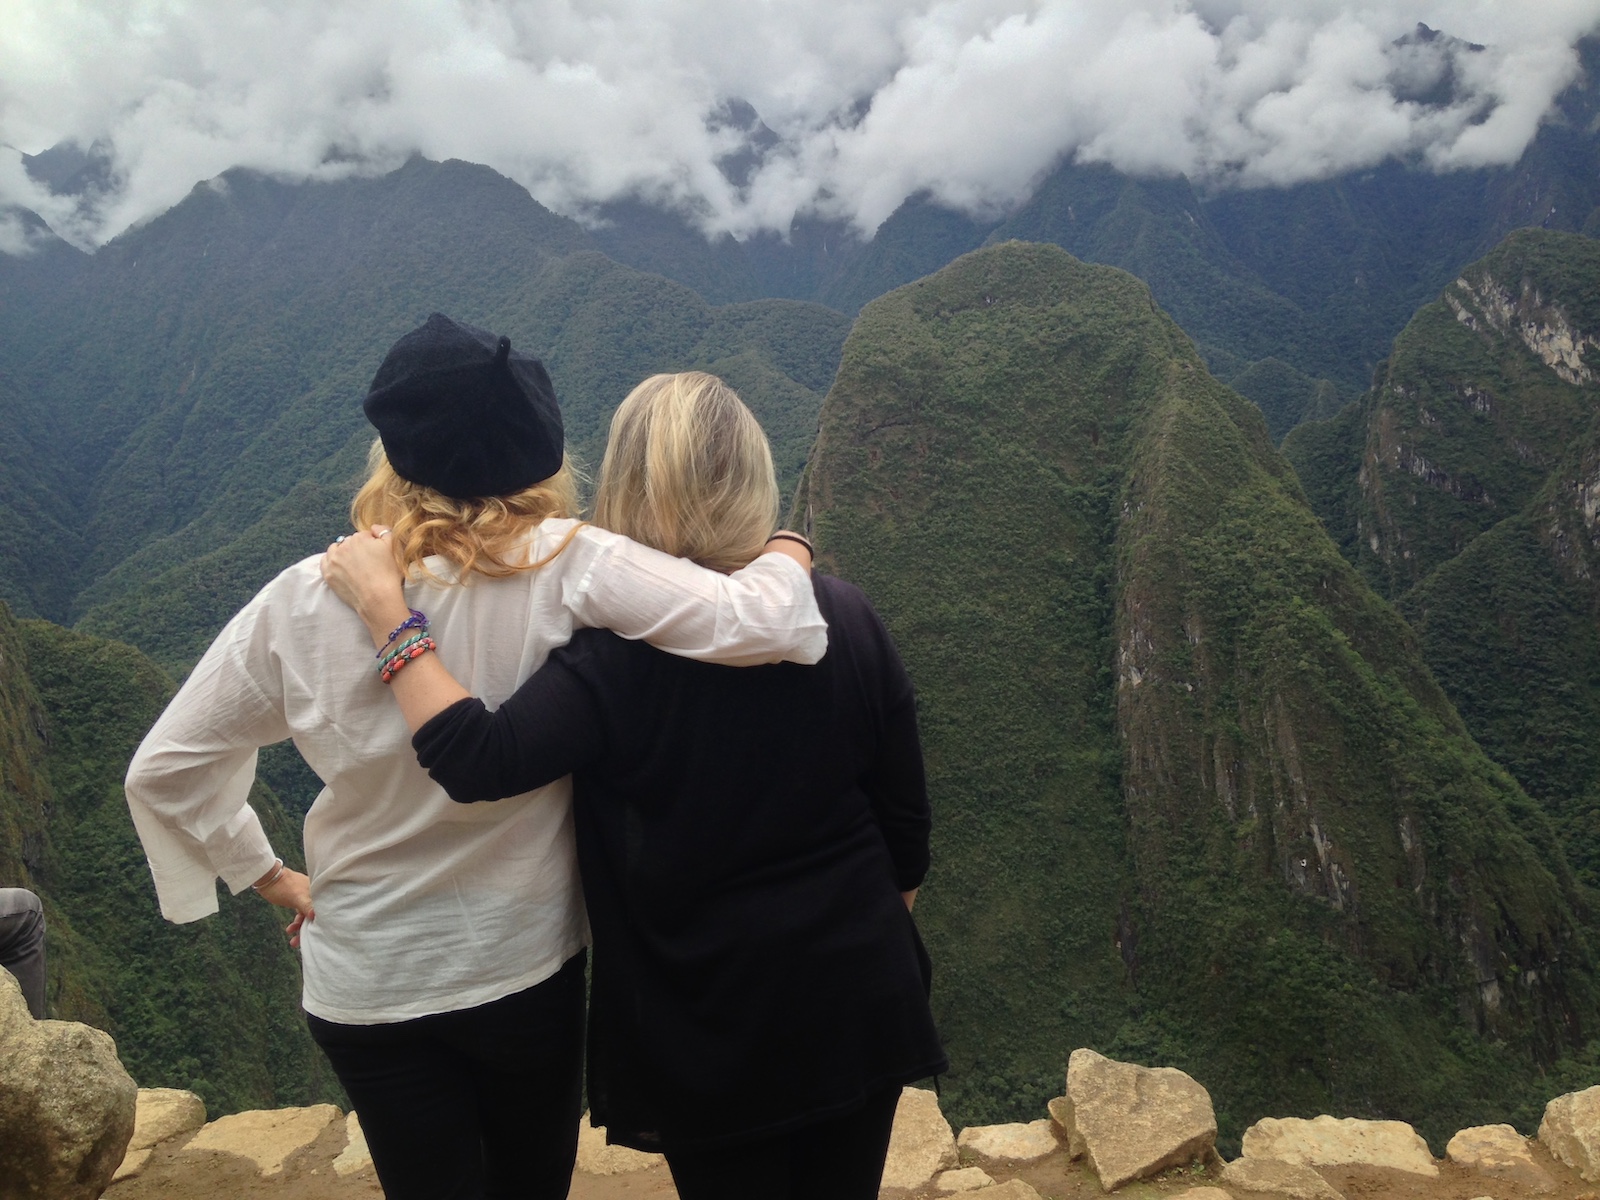 9 Tips for Your Trip to Machu Picchu